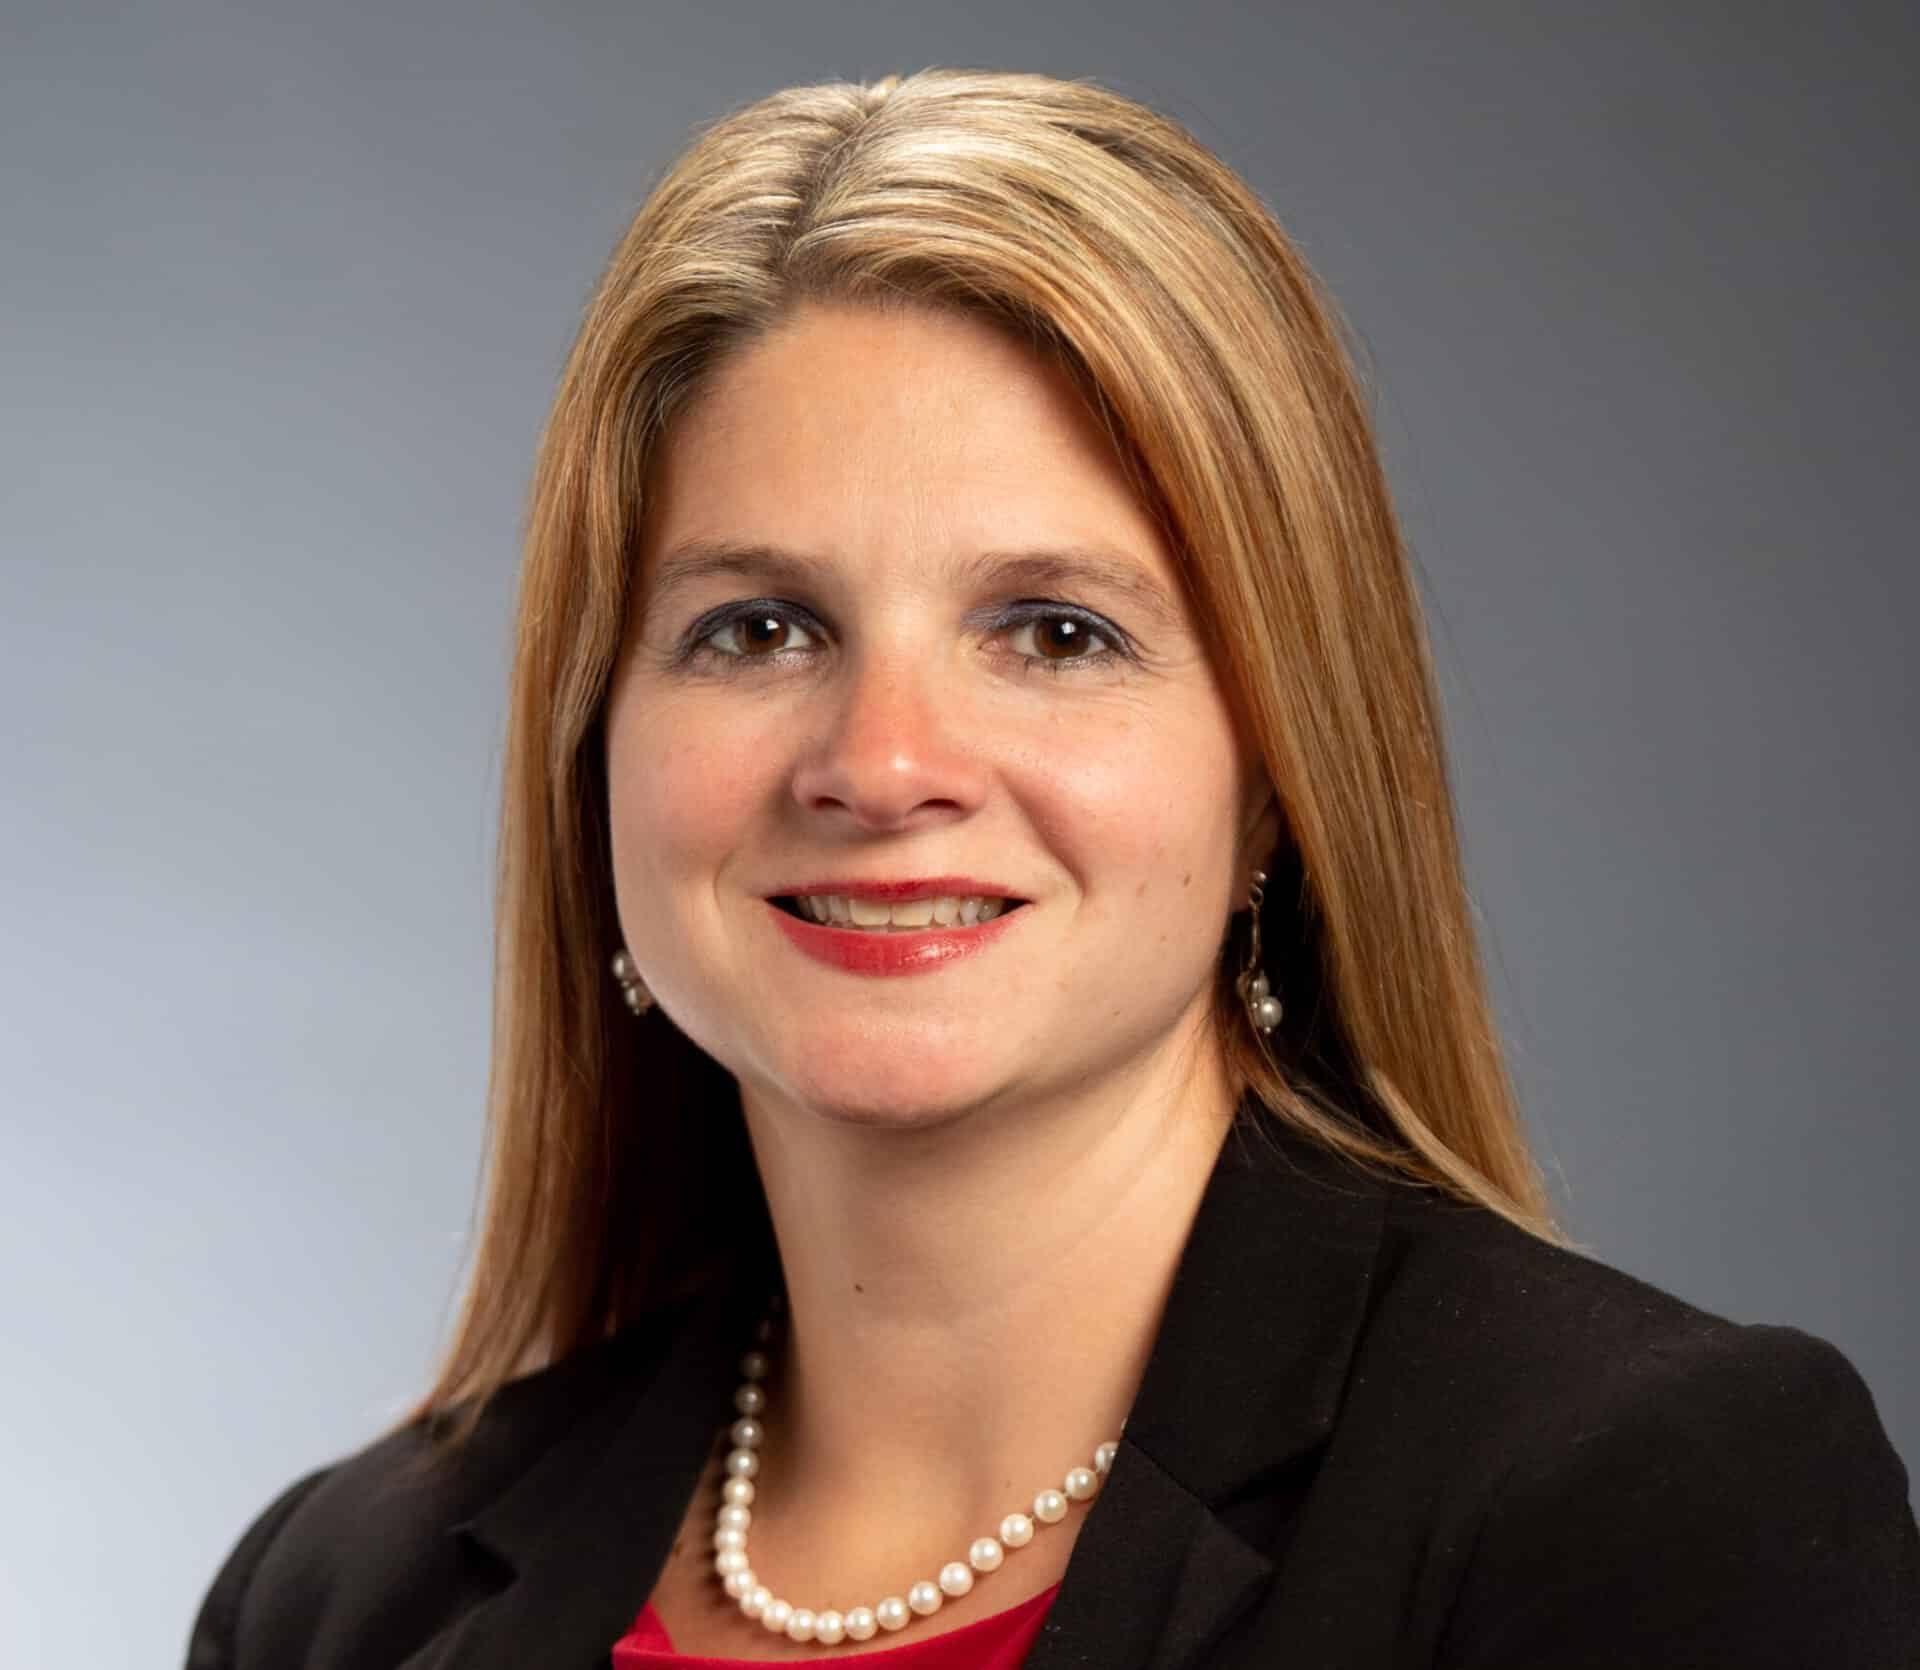 [CREDIT: NEIT] Amy Grzybowski has joined New England Tech as its new Vice President of Community Relations.